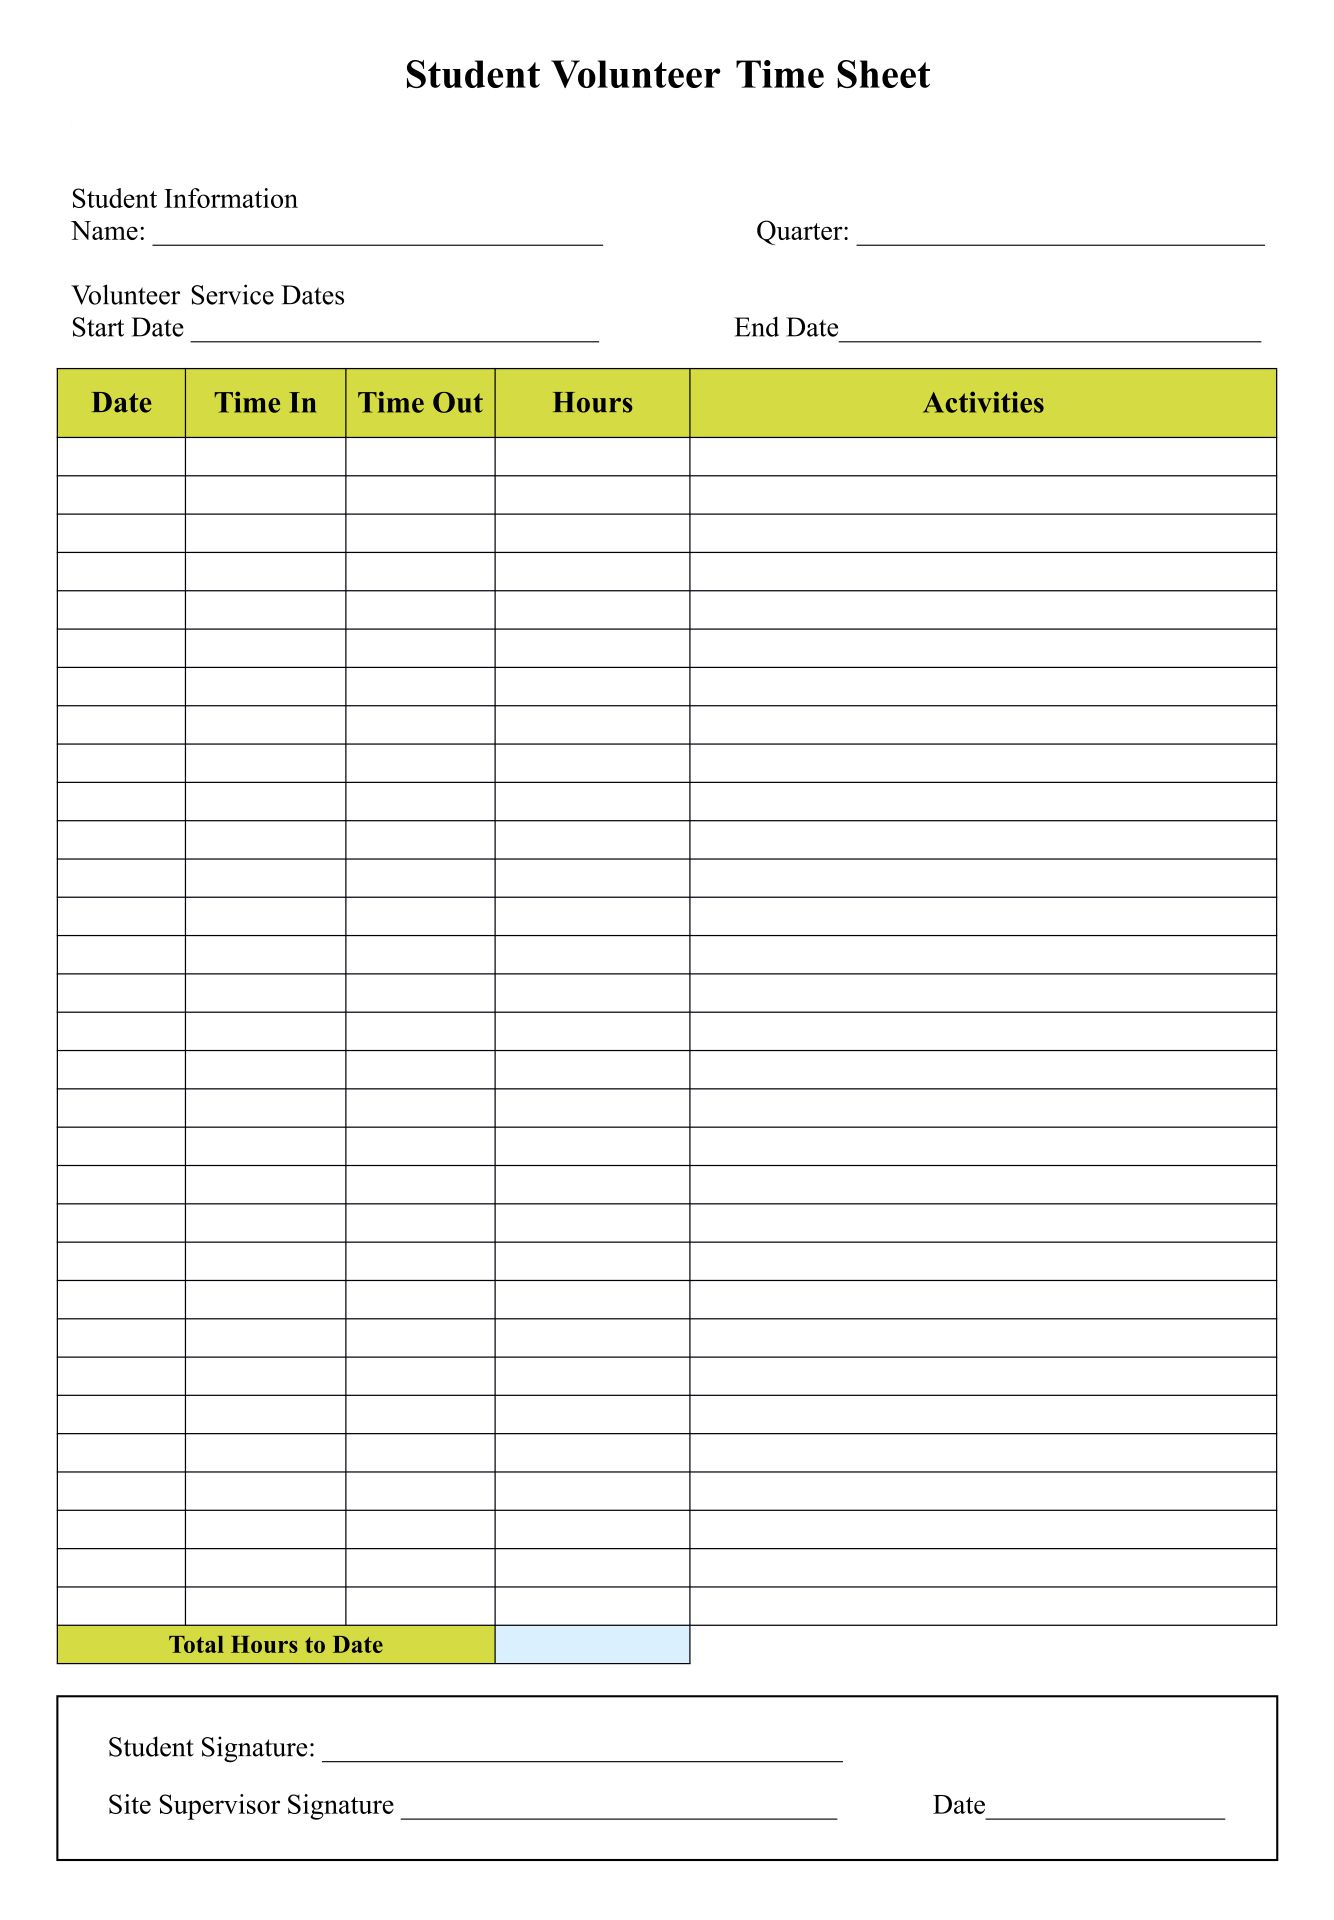 8-best-images-of-blank-printable-timesheets-free-download-weekly-askxz